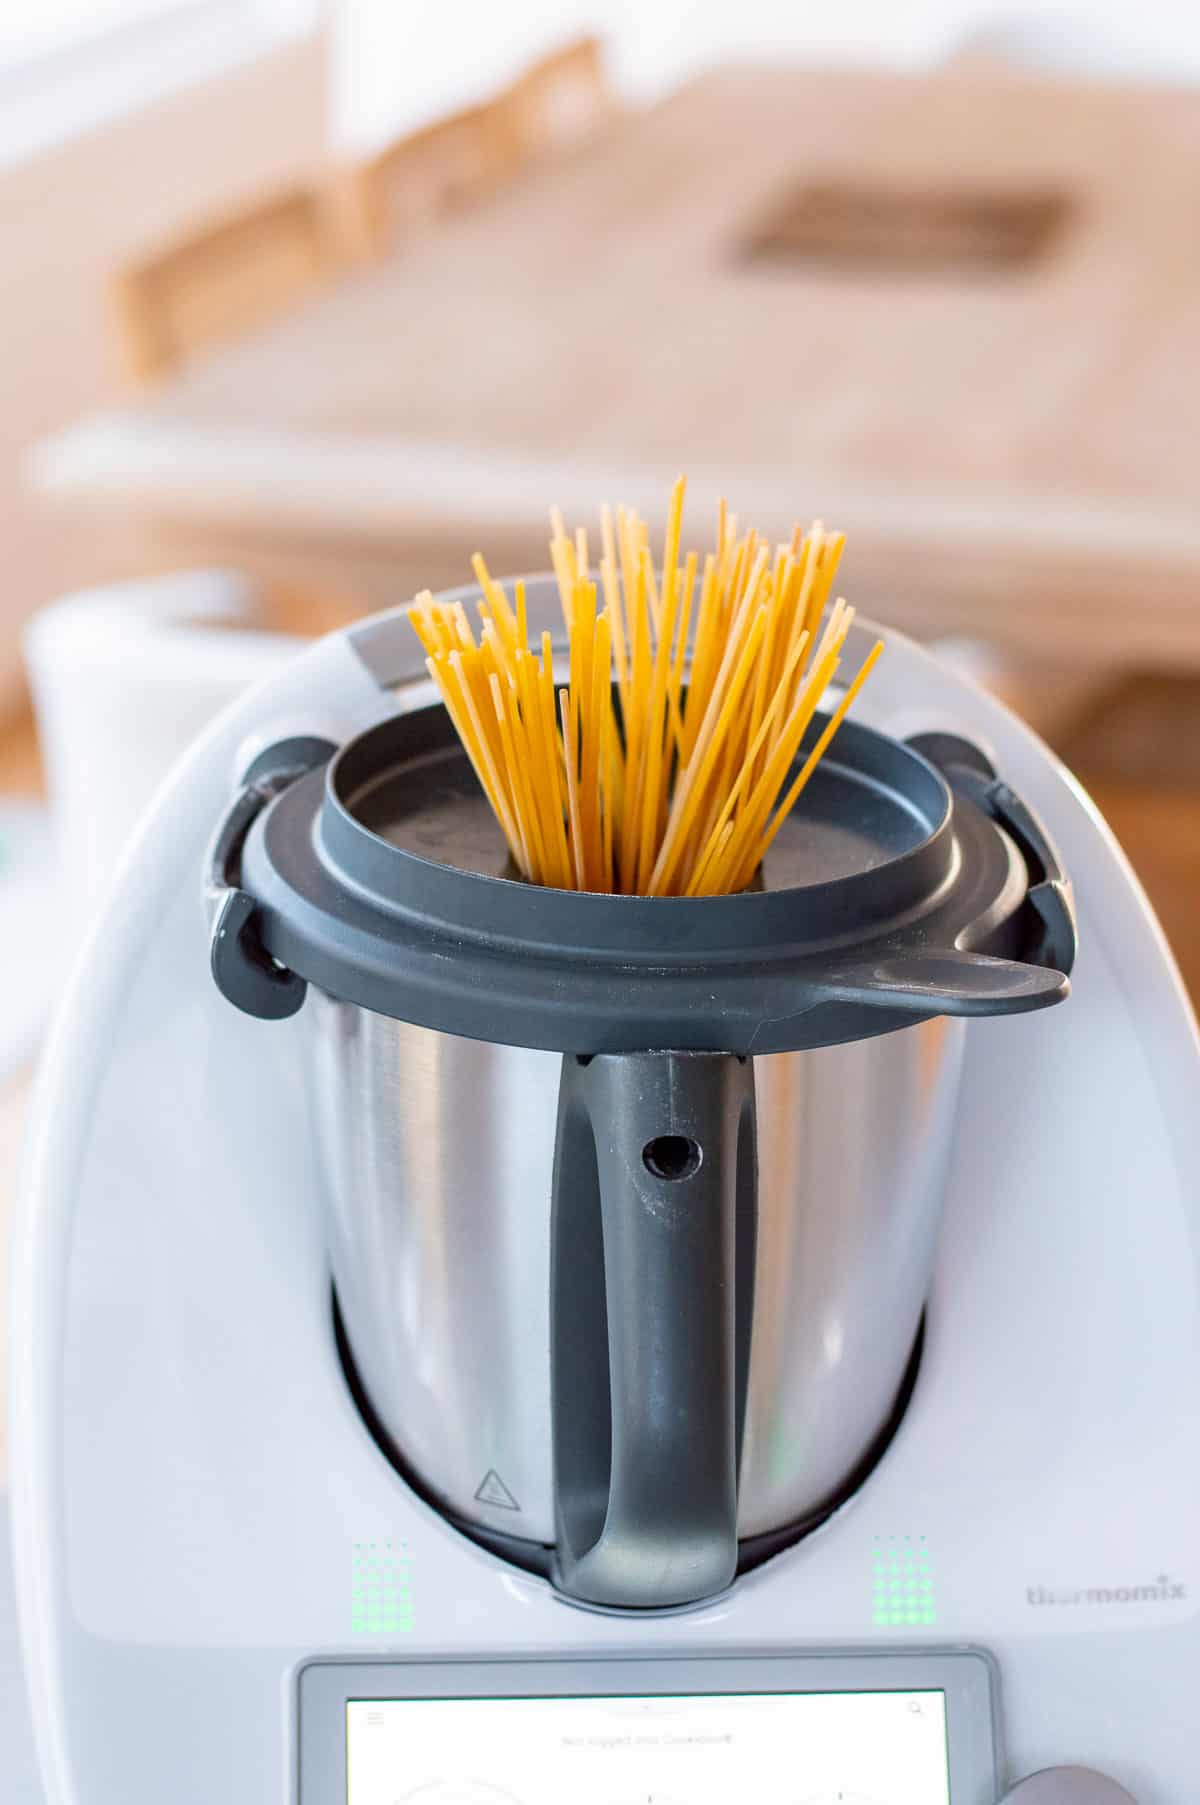 Spaghetti poking out of the top in a Thermomix.